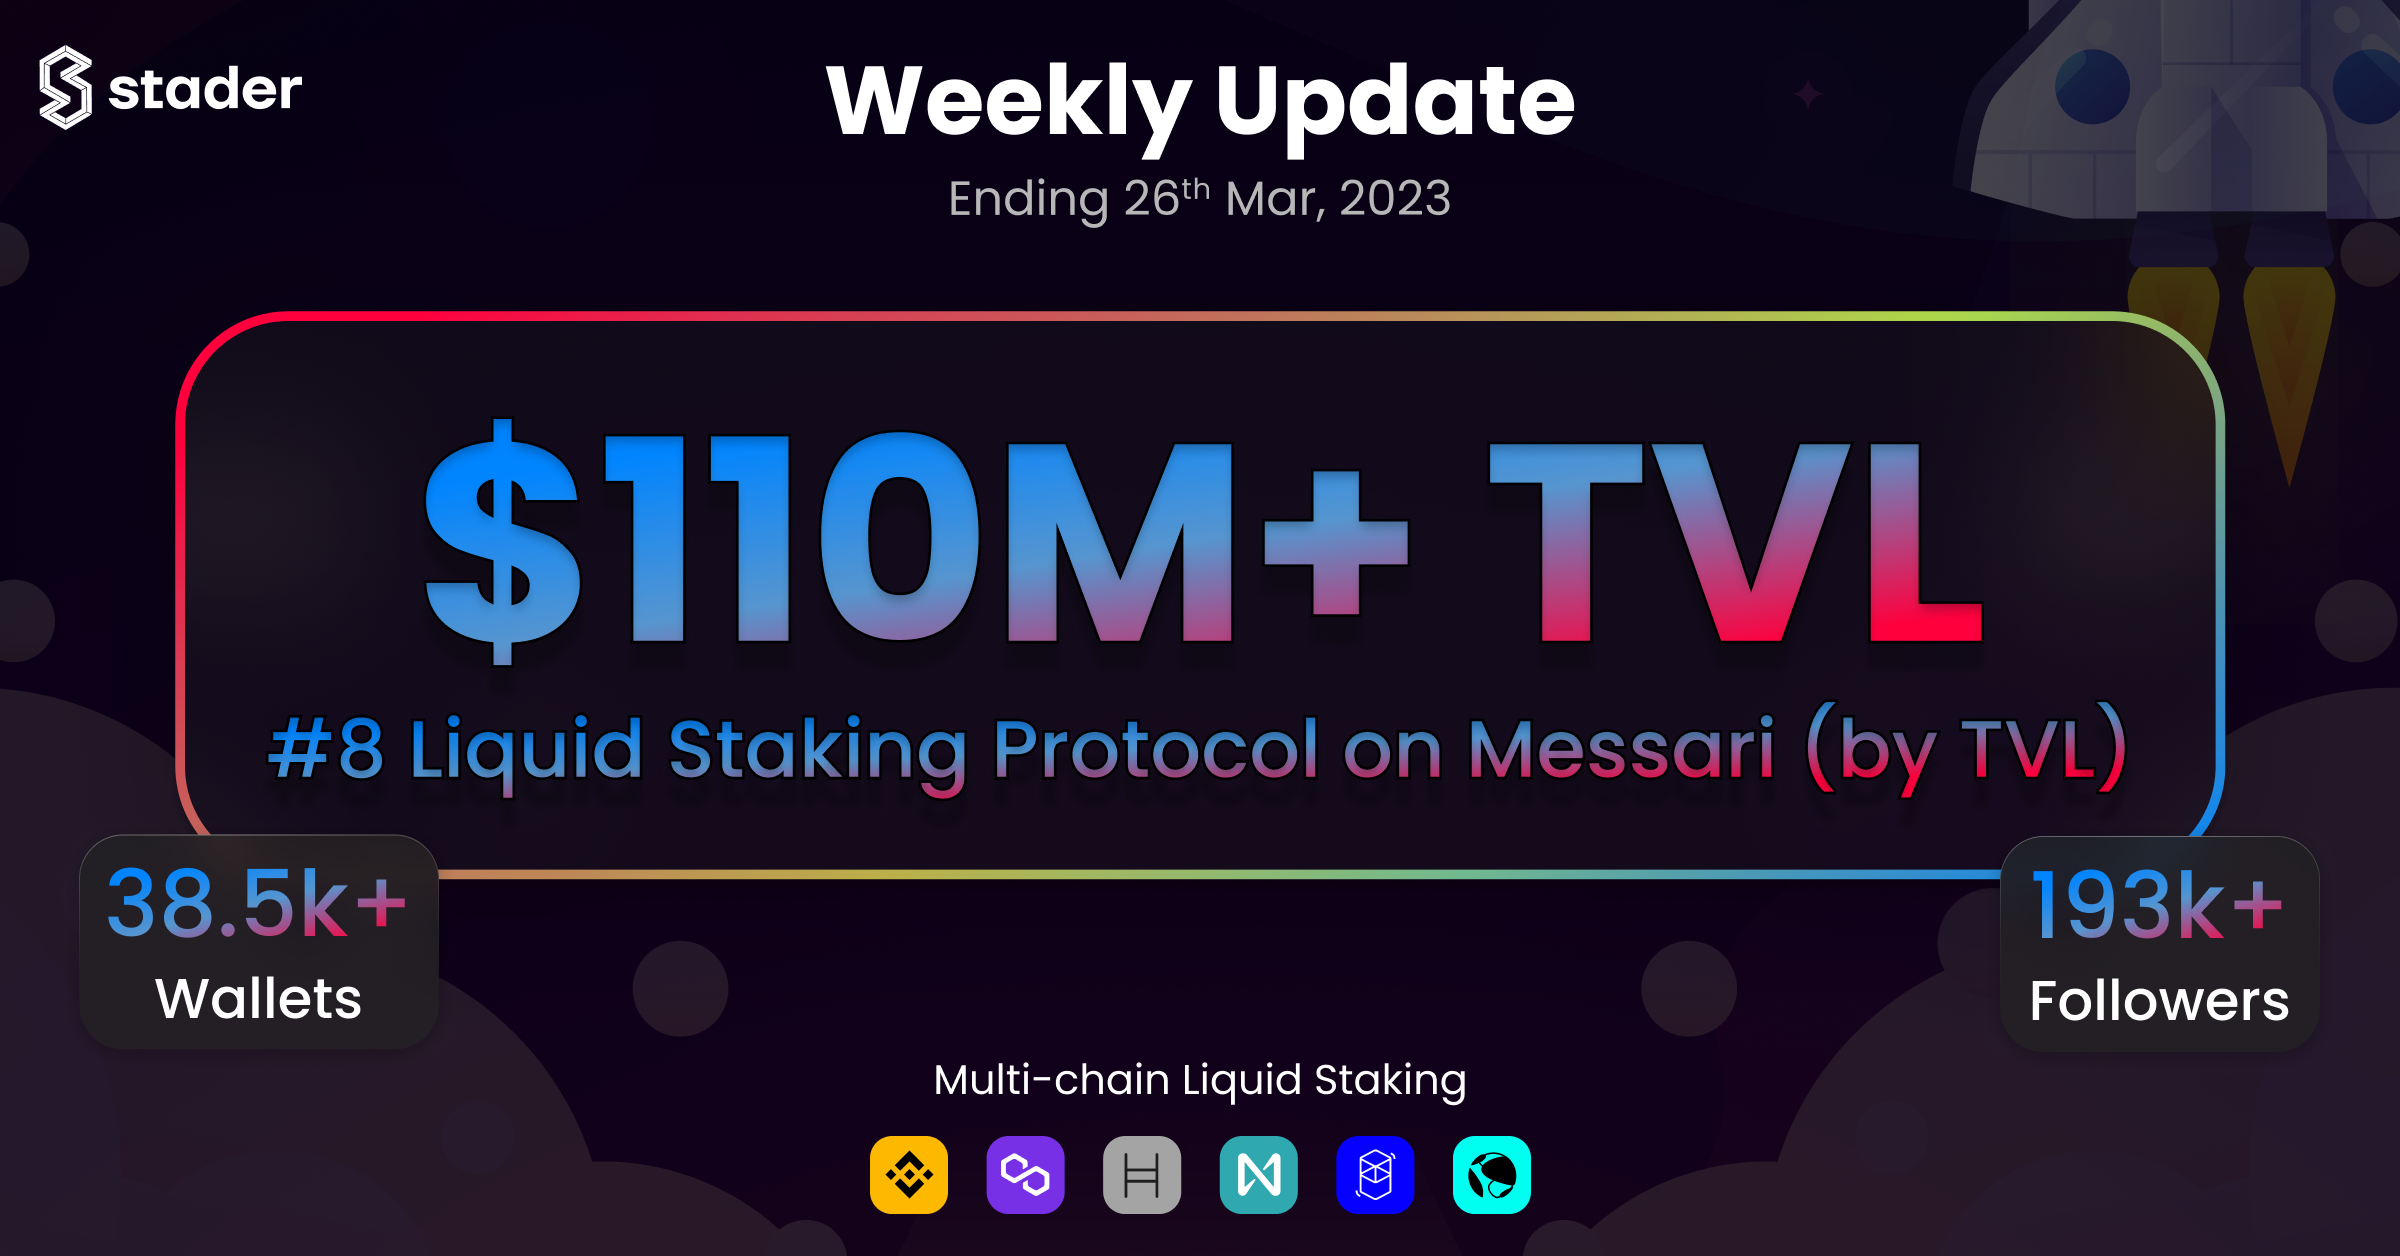 Stader’s Weekly Update (26th March, 2023)